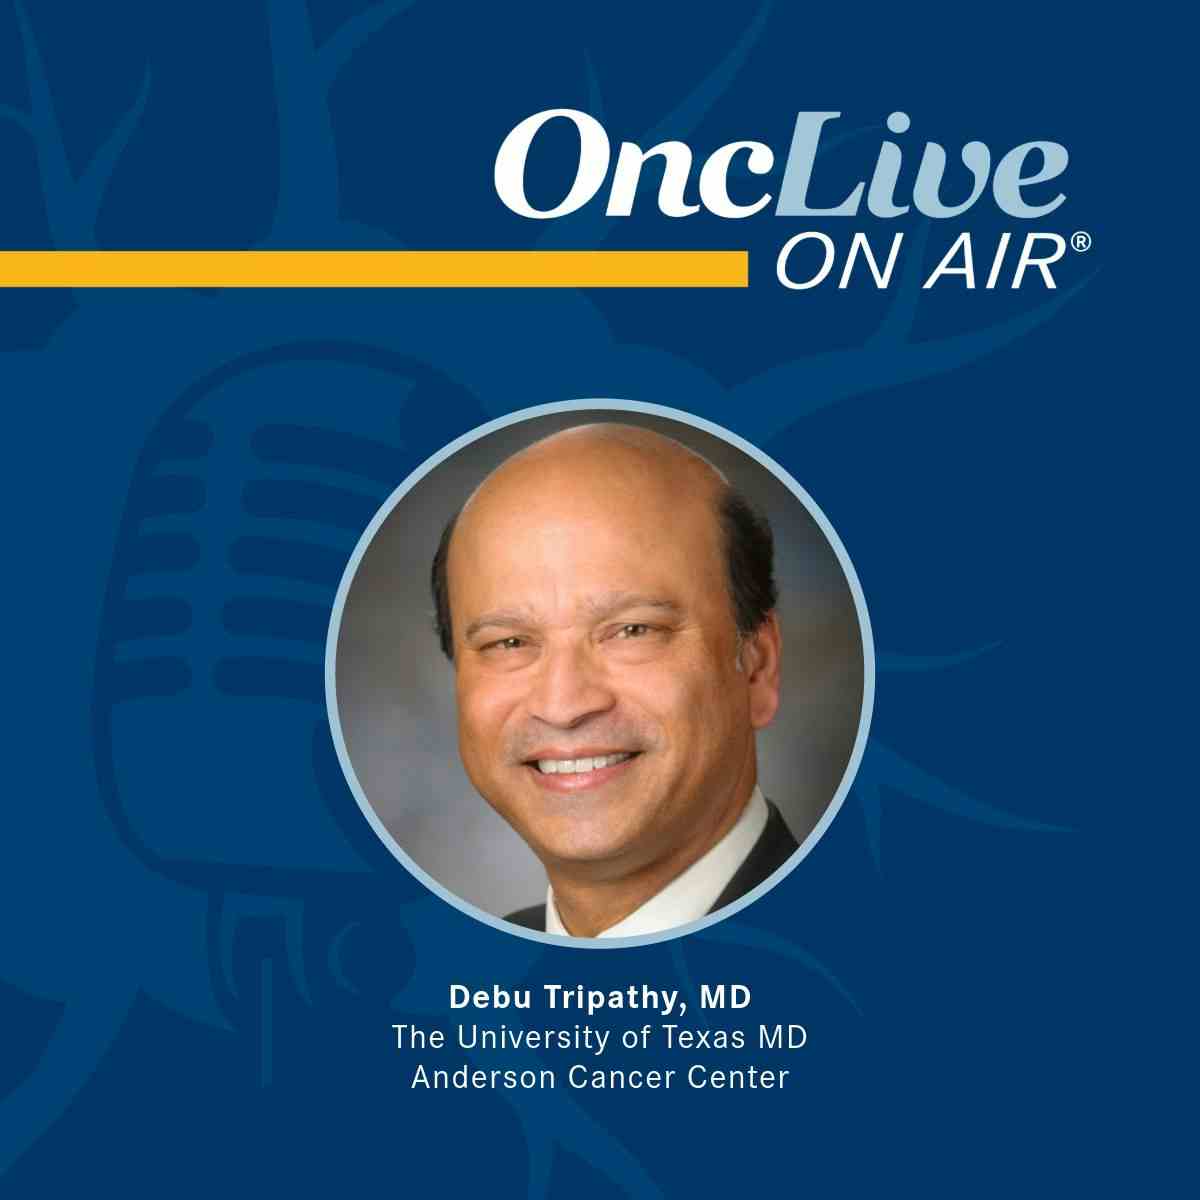 Debu Tripathy, MD, professor, chairman, the Department of Breast Medical Oncology, the Division of Cancer Medicine, The University of Texas MD Anderson Cancer Center